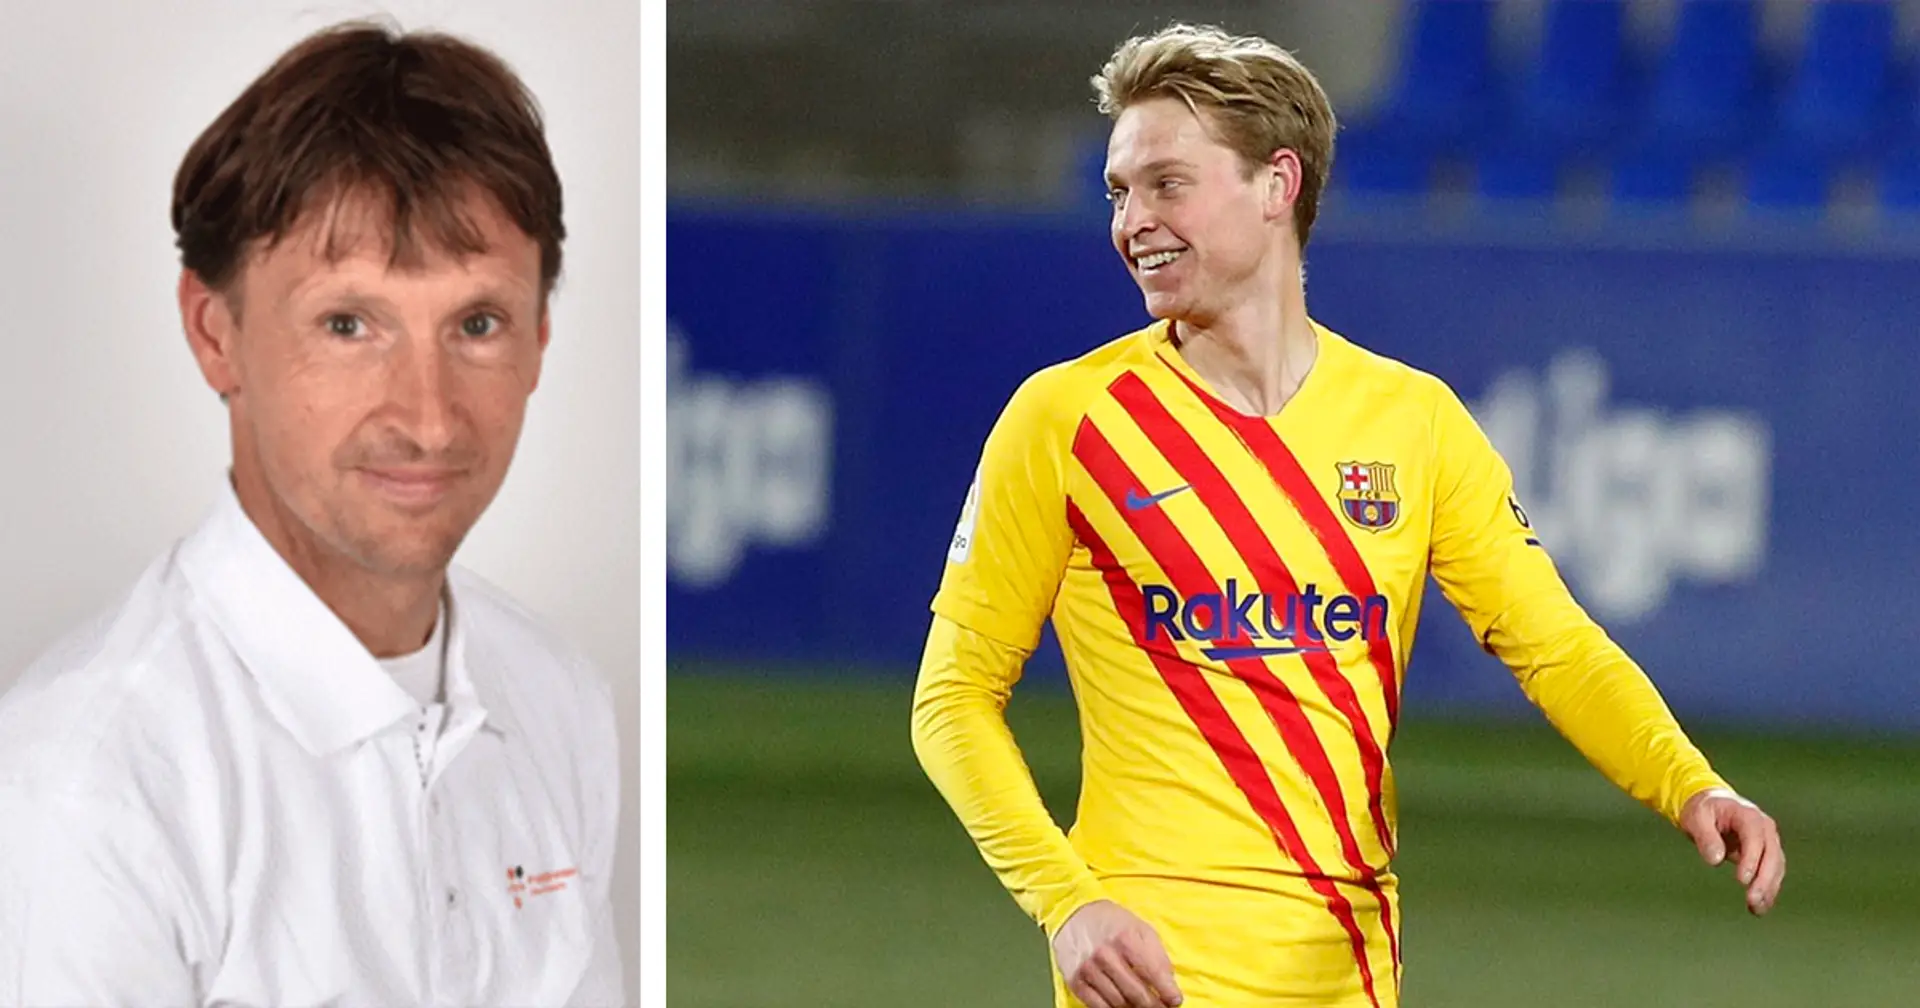 'He was good at breaking the lines, passing, dribbling, but not shooting!': De Jong's former coach on Frenkie's goalscoring form